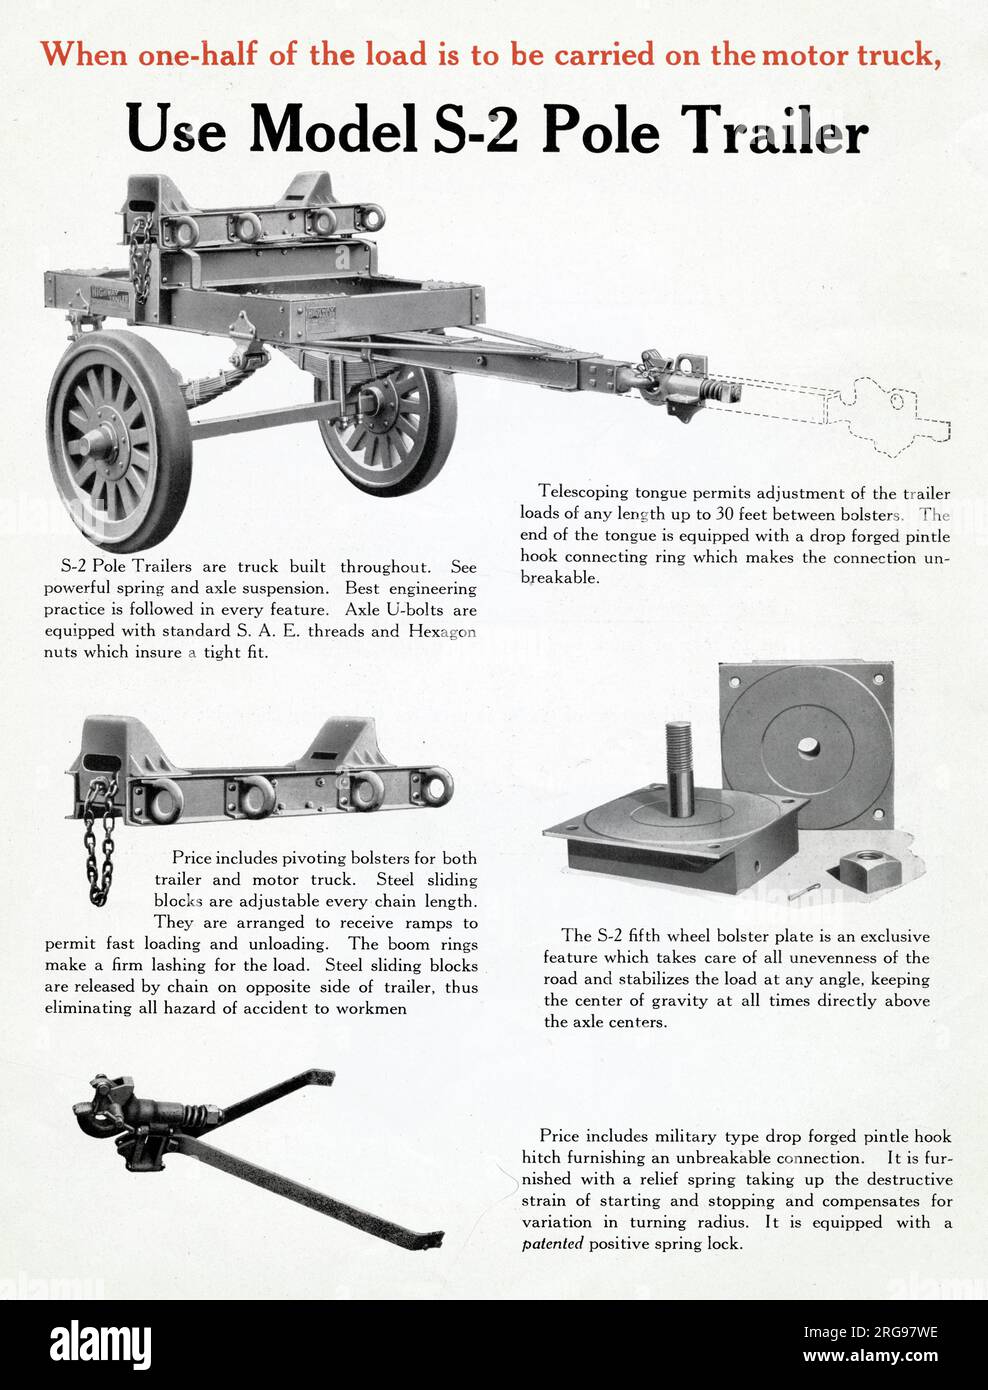 Model S-2 Pole Trailer and accessories -- when one half of the load is to be carried on the motor truck. Stock Photo